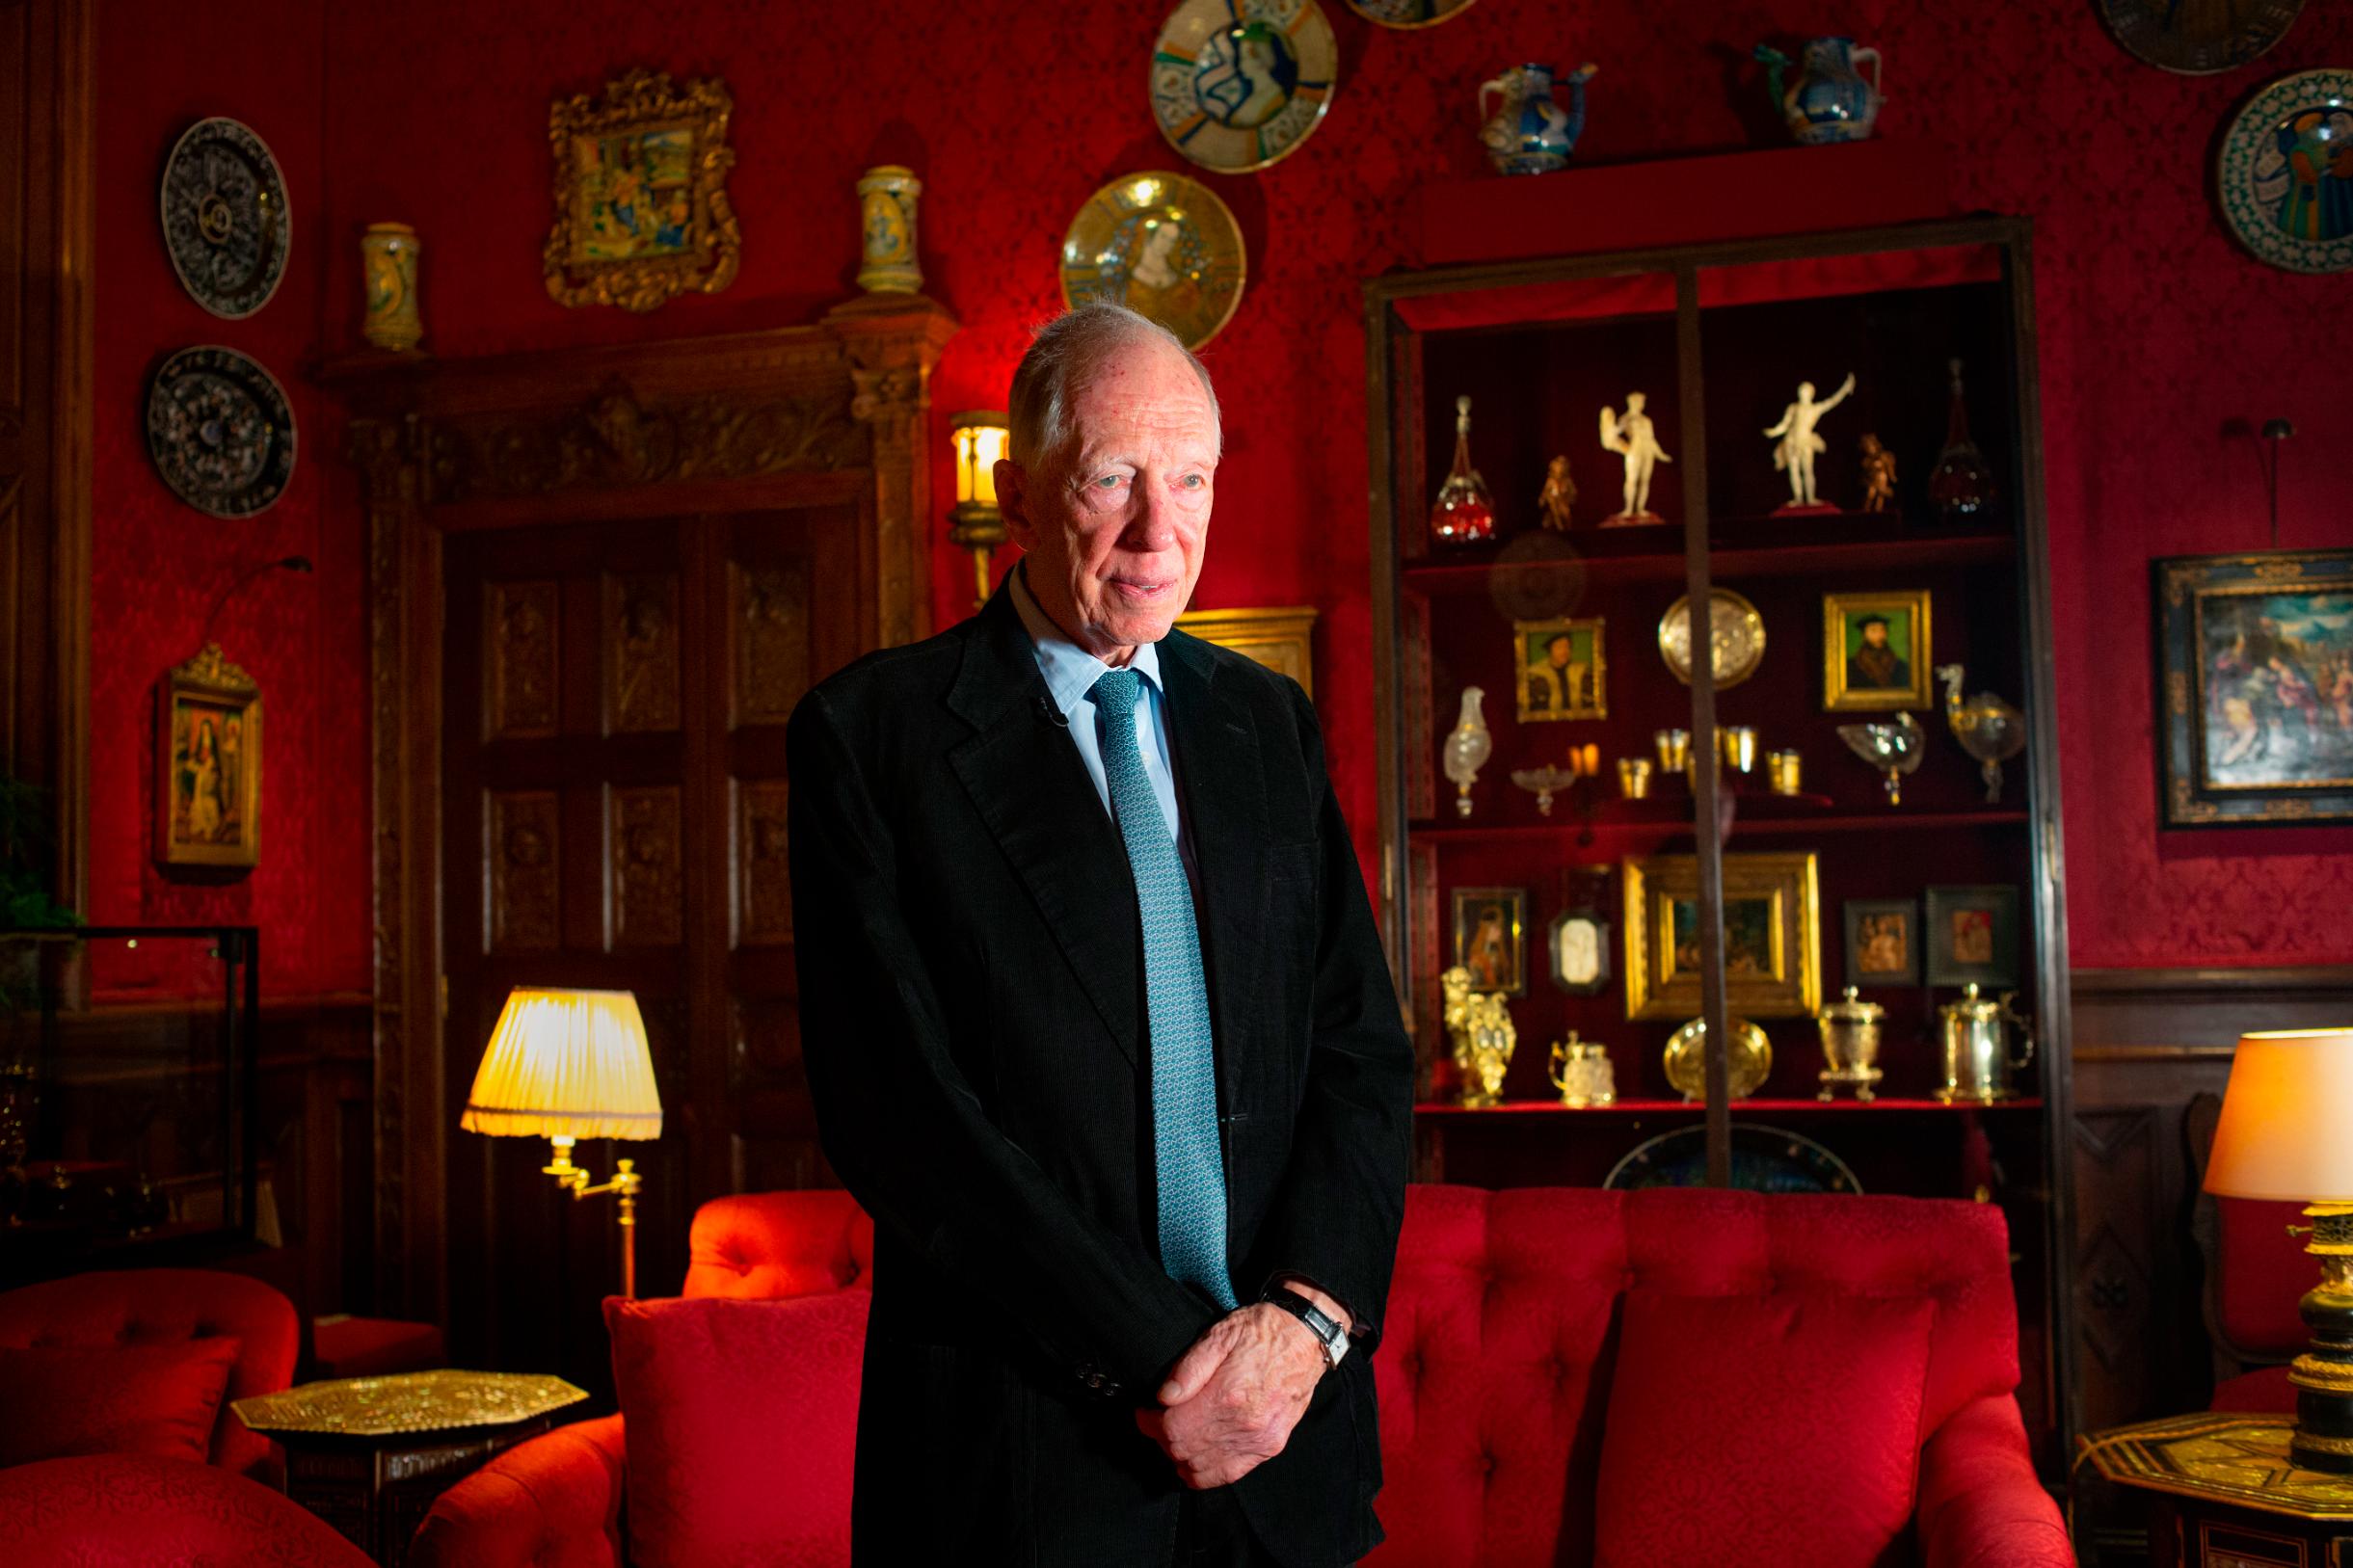 History's riches: Inside the Rothschild collection - CNN Style